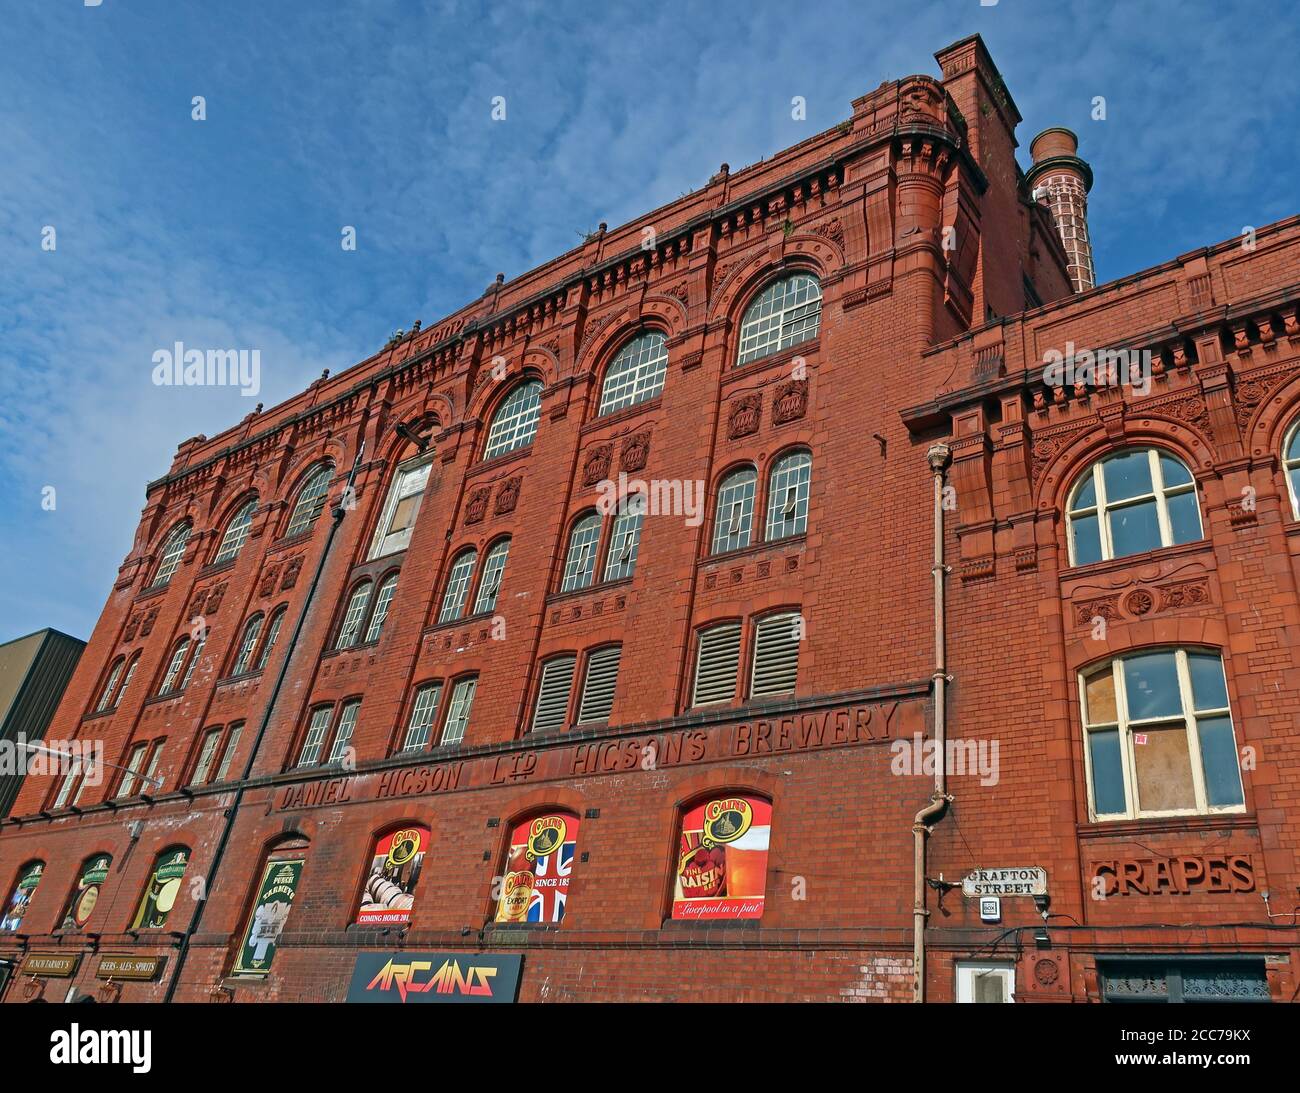 Higsons, Cains Brewery, 39 Stanhope St, Liverpool, Merseyside, England, UK, L8 5RE Stockfoto